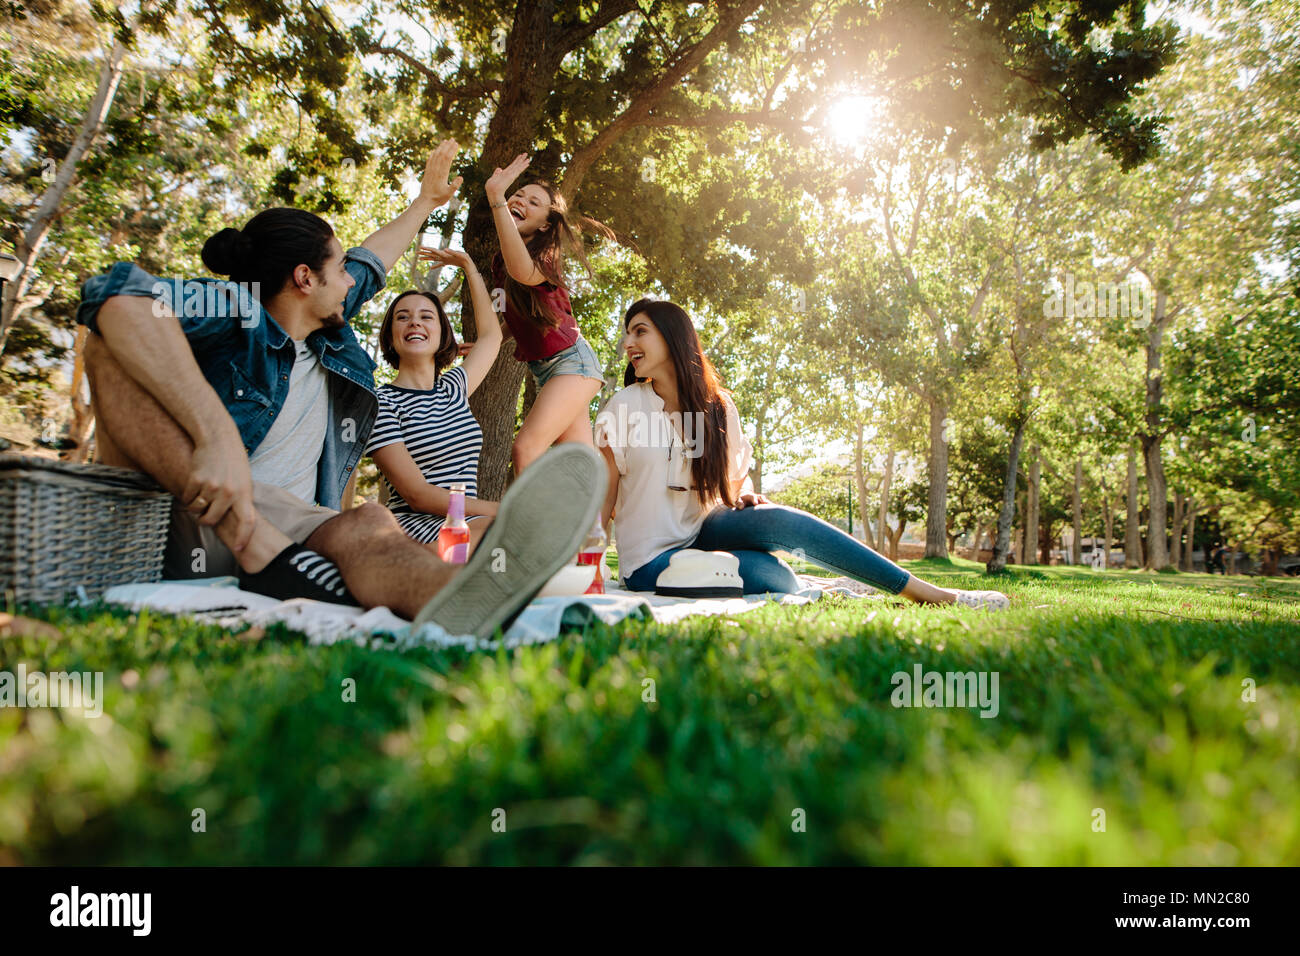 Woman giving high five to male friend at park. Group of young people having great time at picnic. Stock Photo